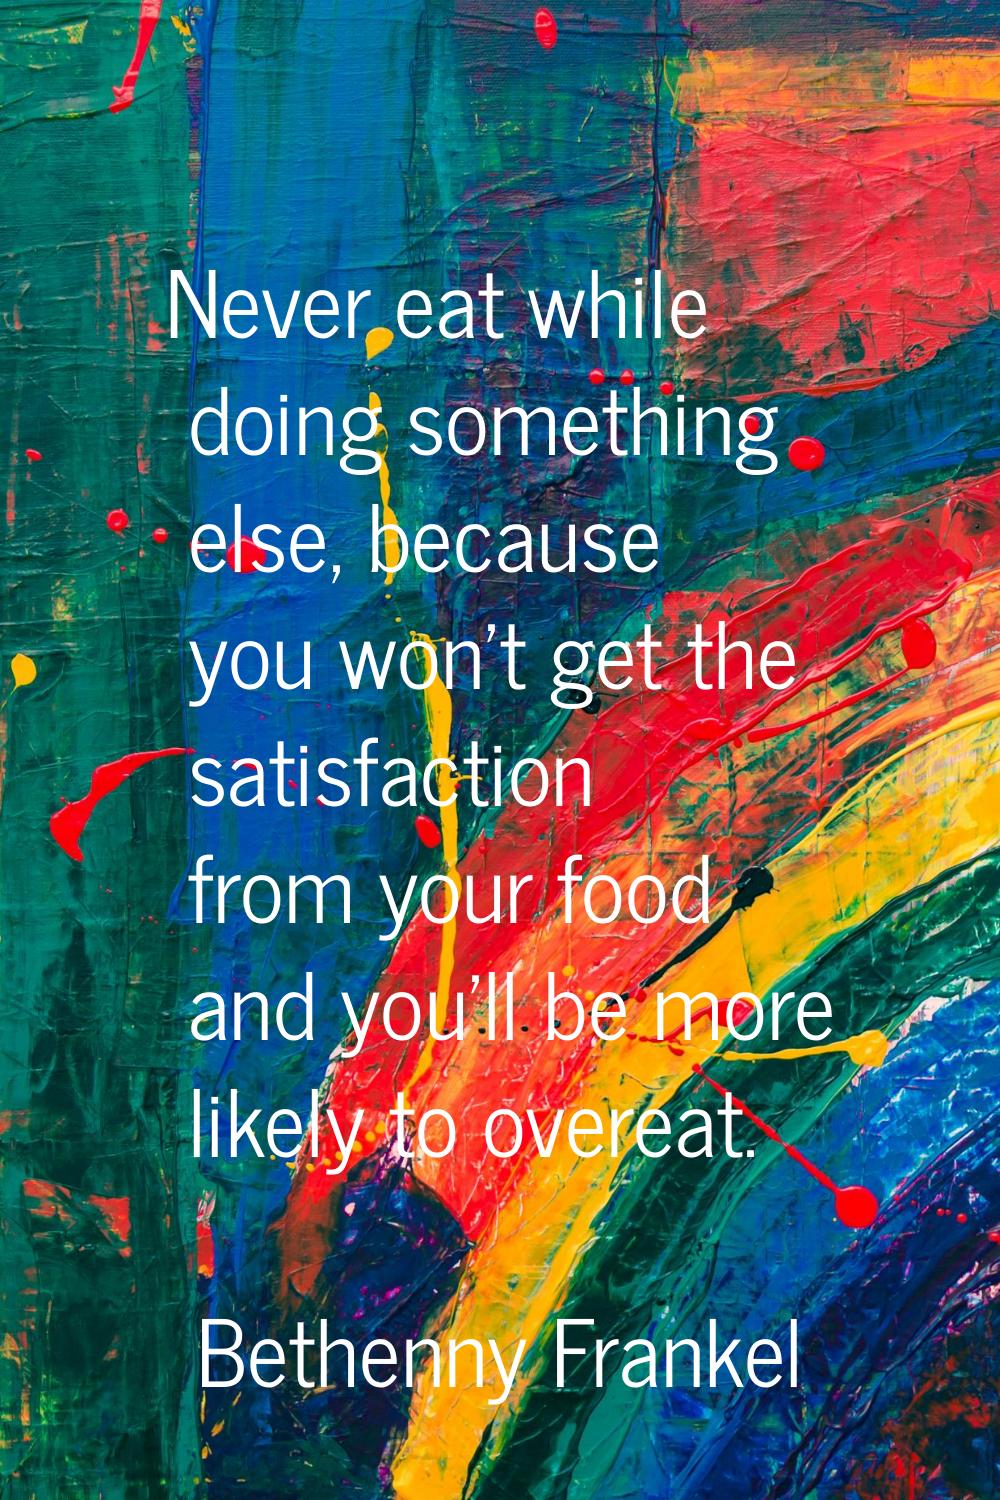 Never eat while doing something else, because you won't get the satisfaction from your food and you